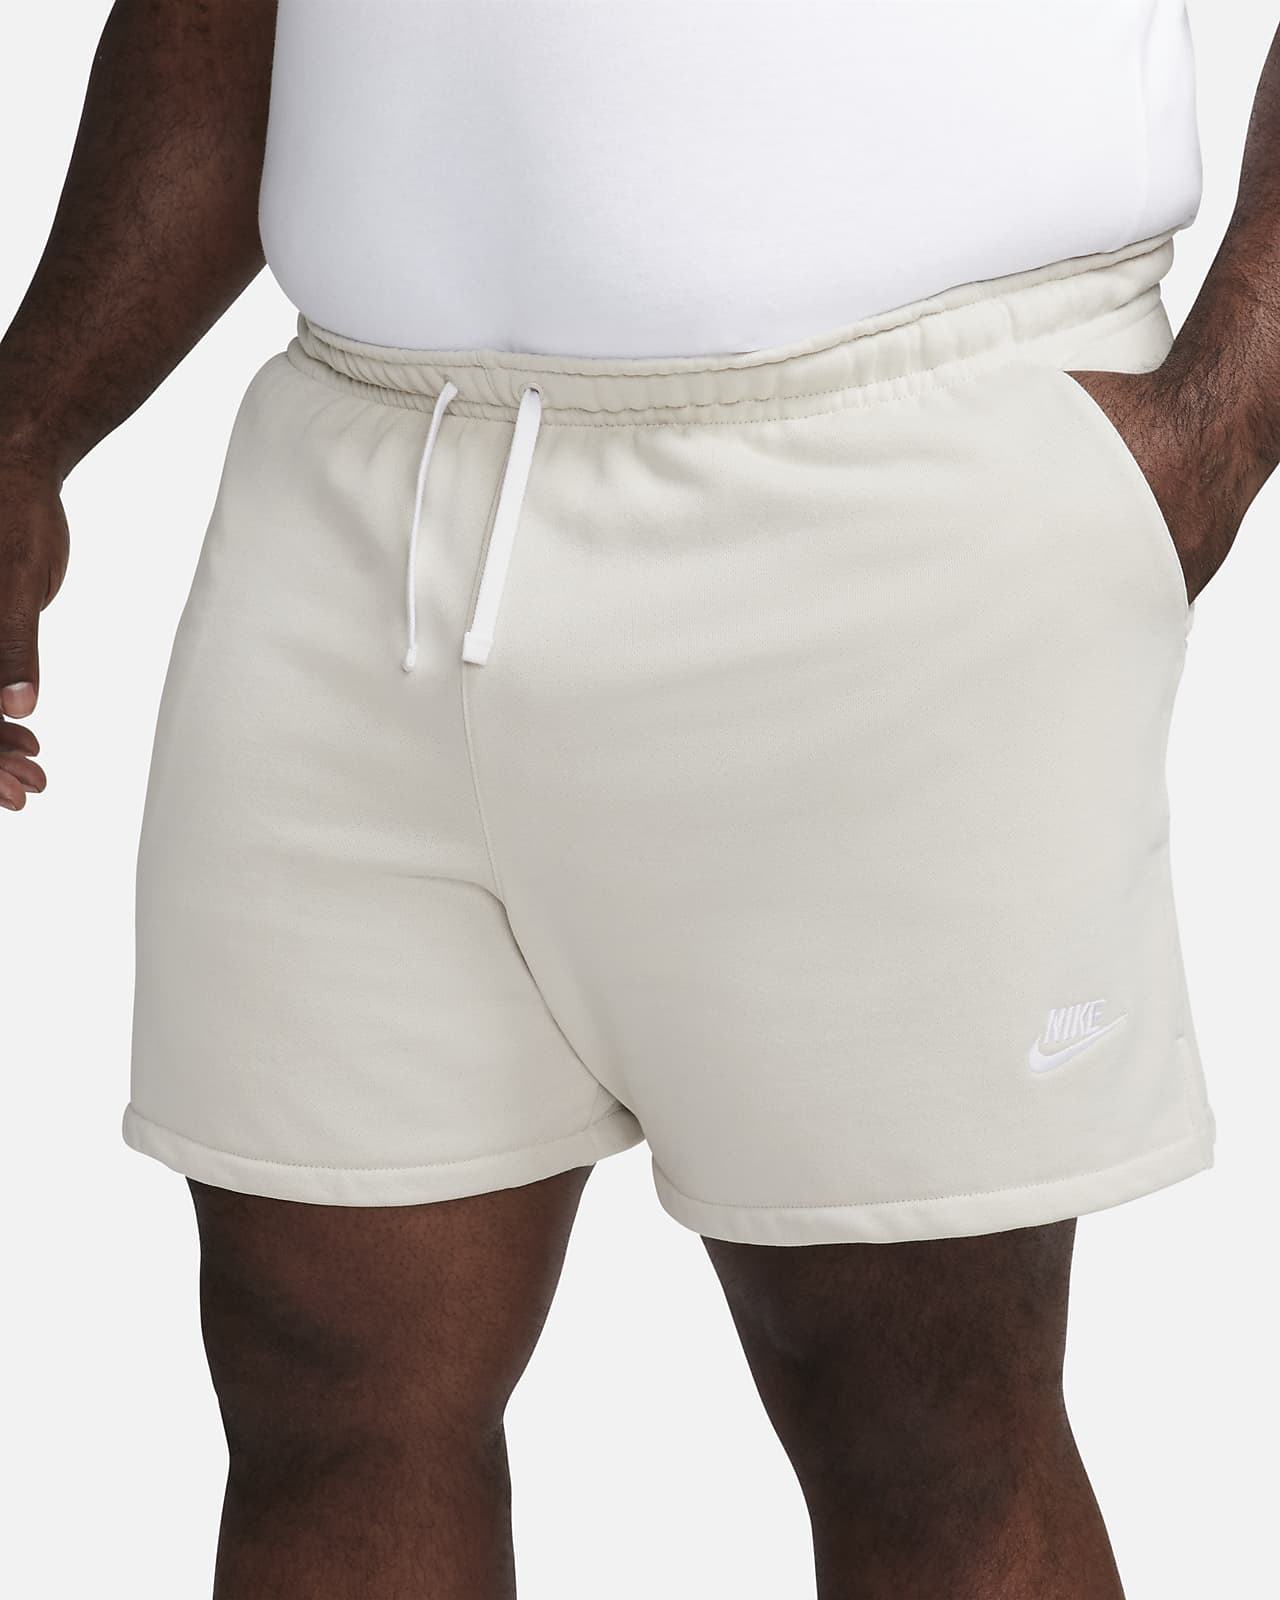 Nike Terry Shorts – DTLR